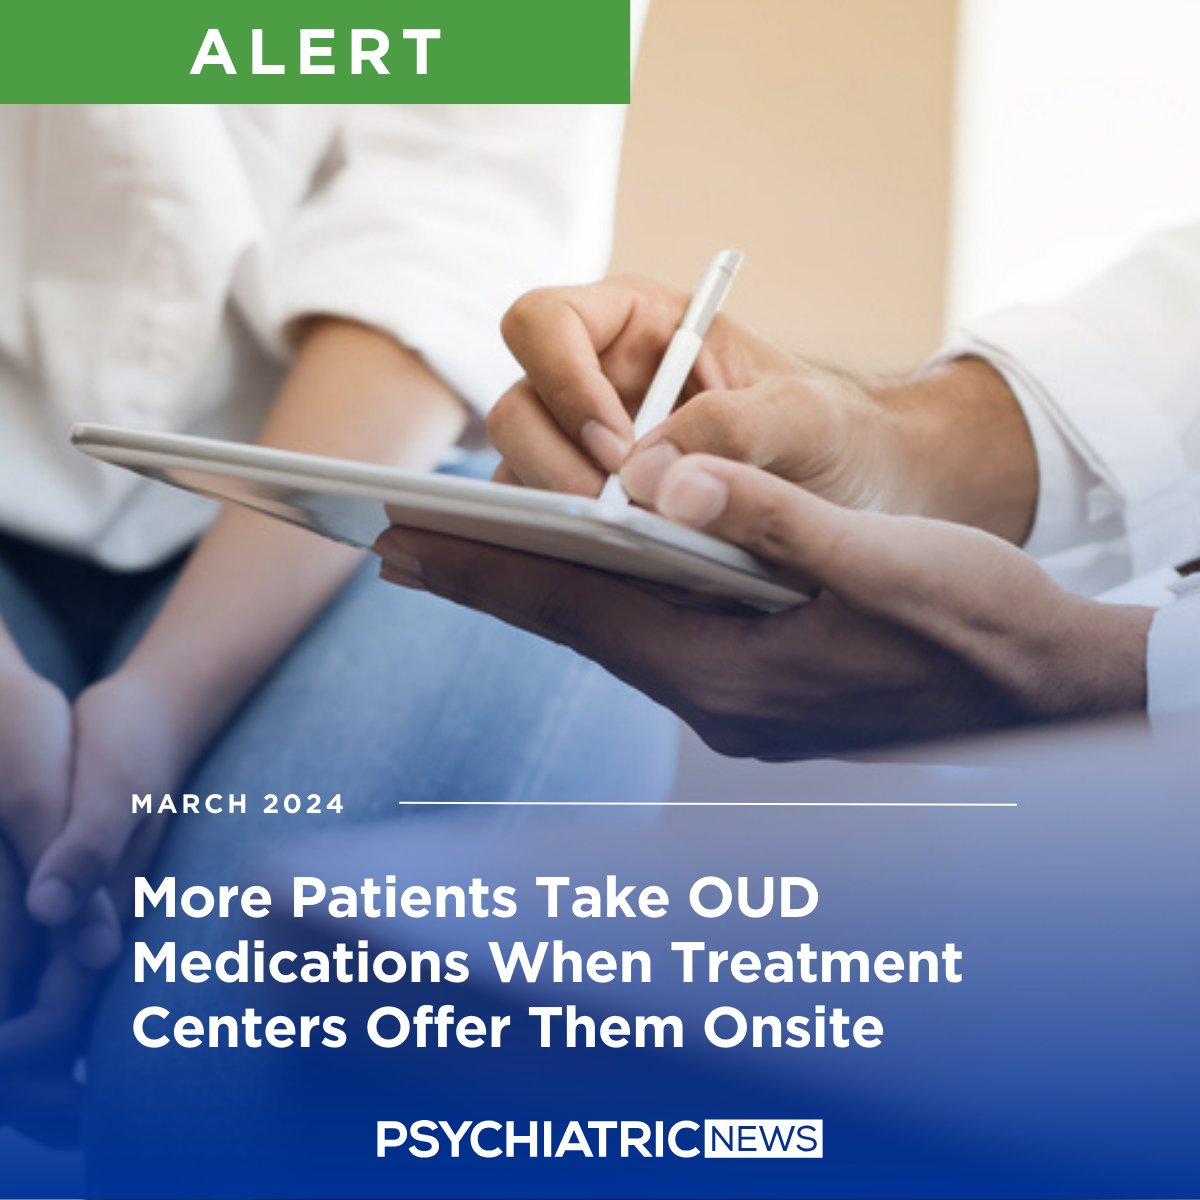 “In July 2018, Philadelphia became the first U.S. municipality to mandate the availability of medications for #opioid use disorder (MOUD) in publicly funded substance use disorder treatment agencies.” ow.ly/rPuu50R569i #MentalHealth